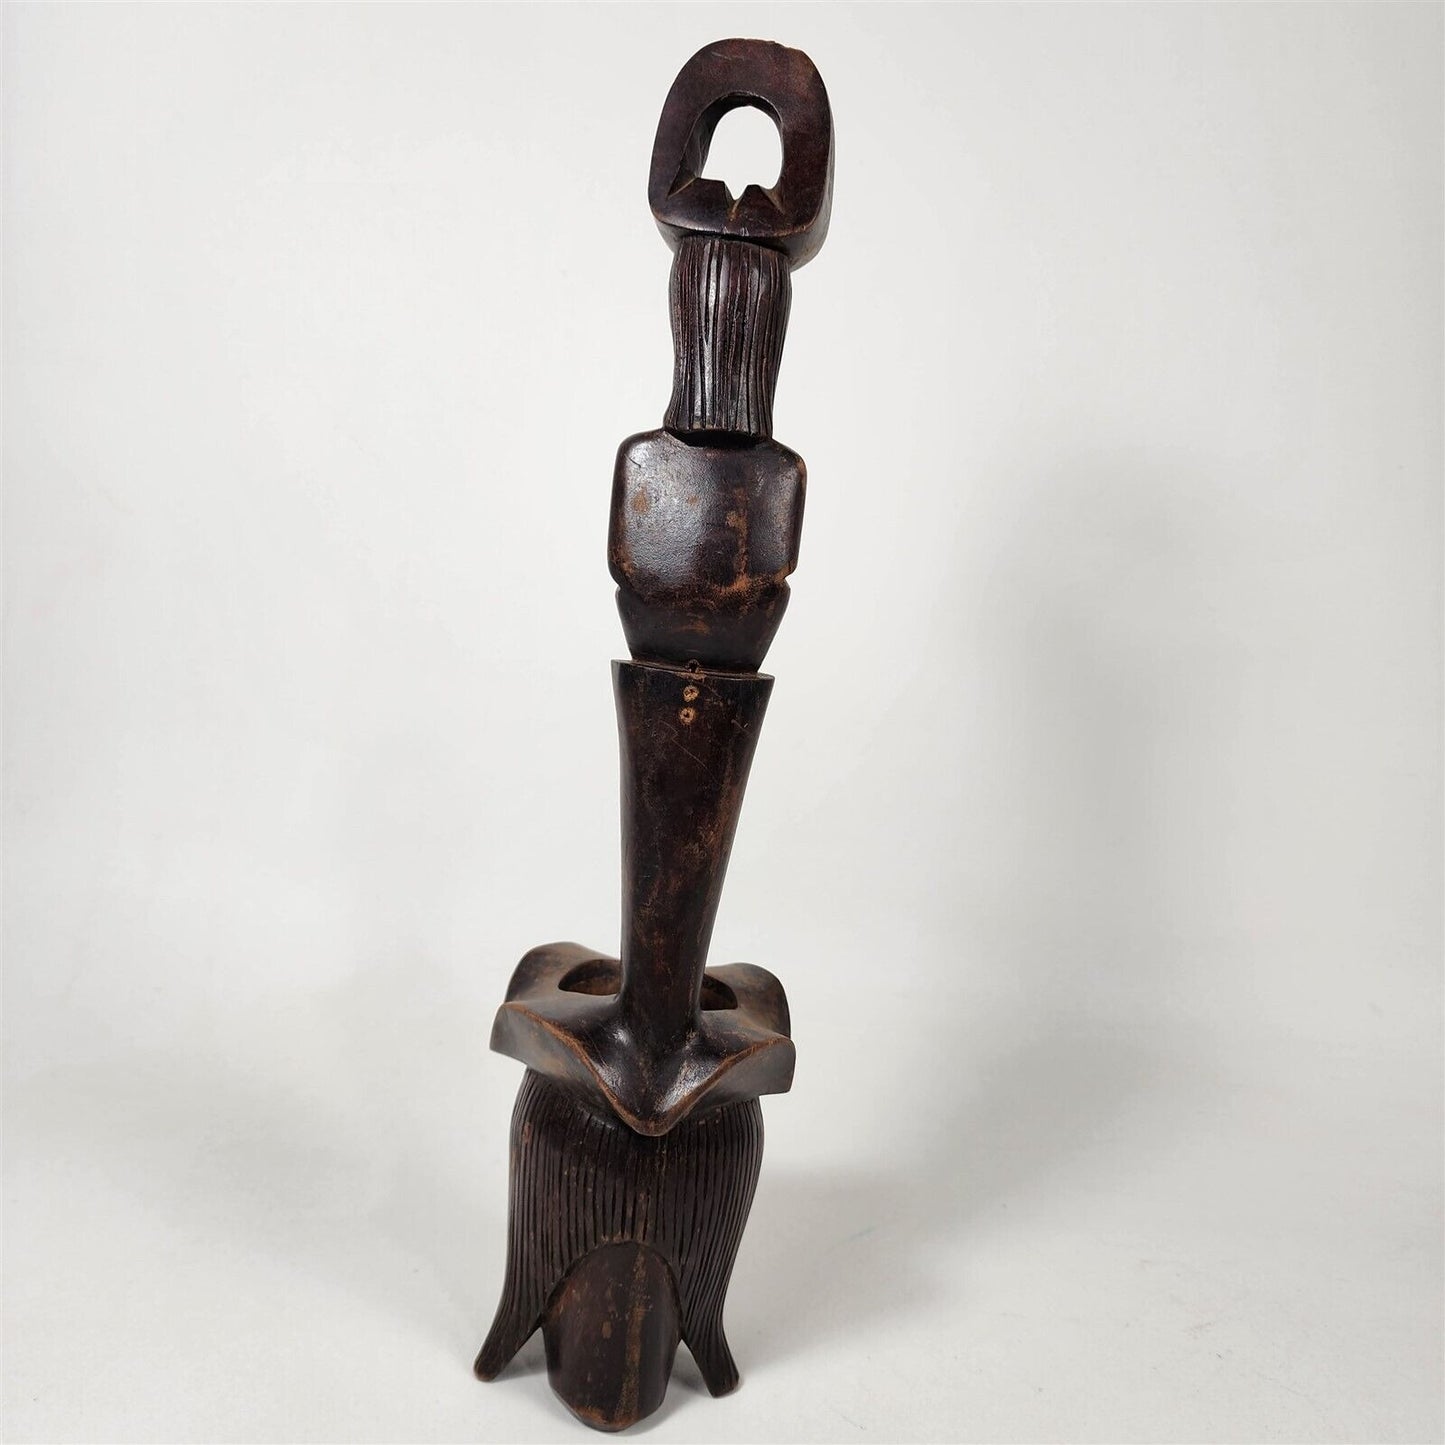 Vintage African Fertility Statue Carved Wood Tribal Art - 16" tall